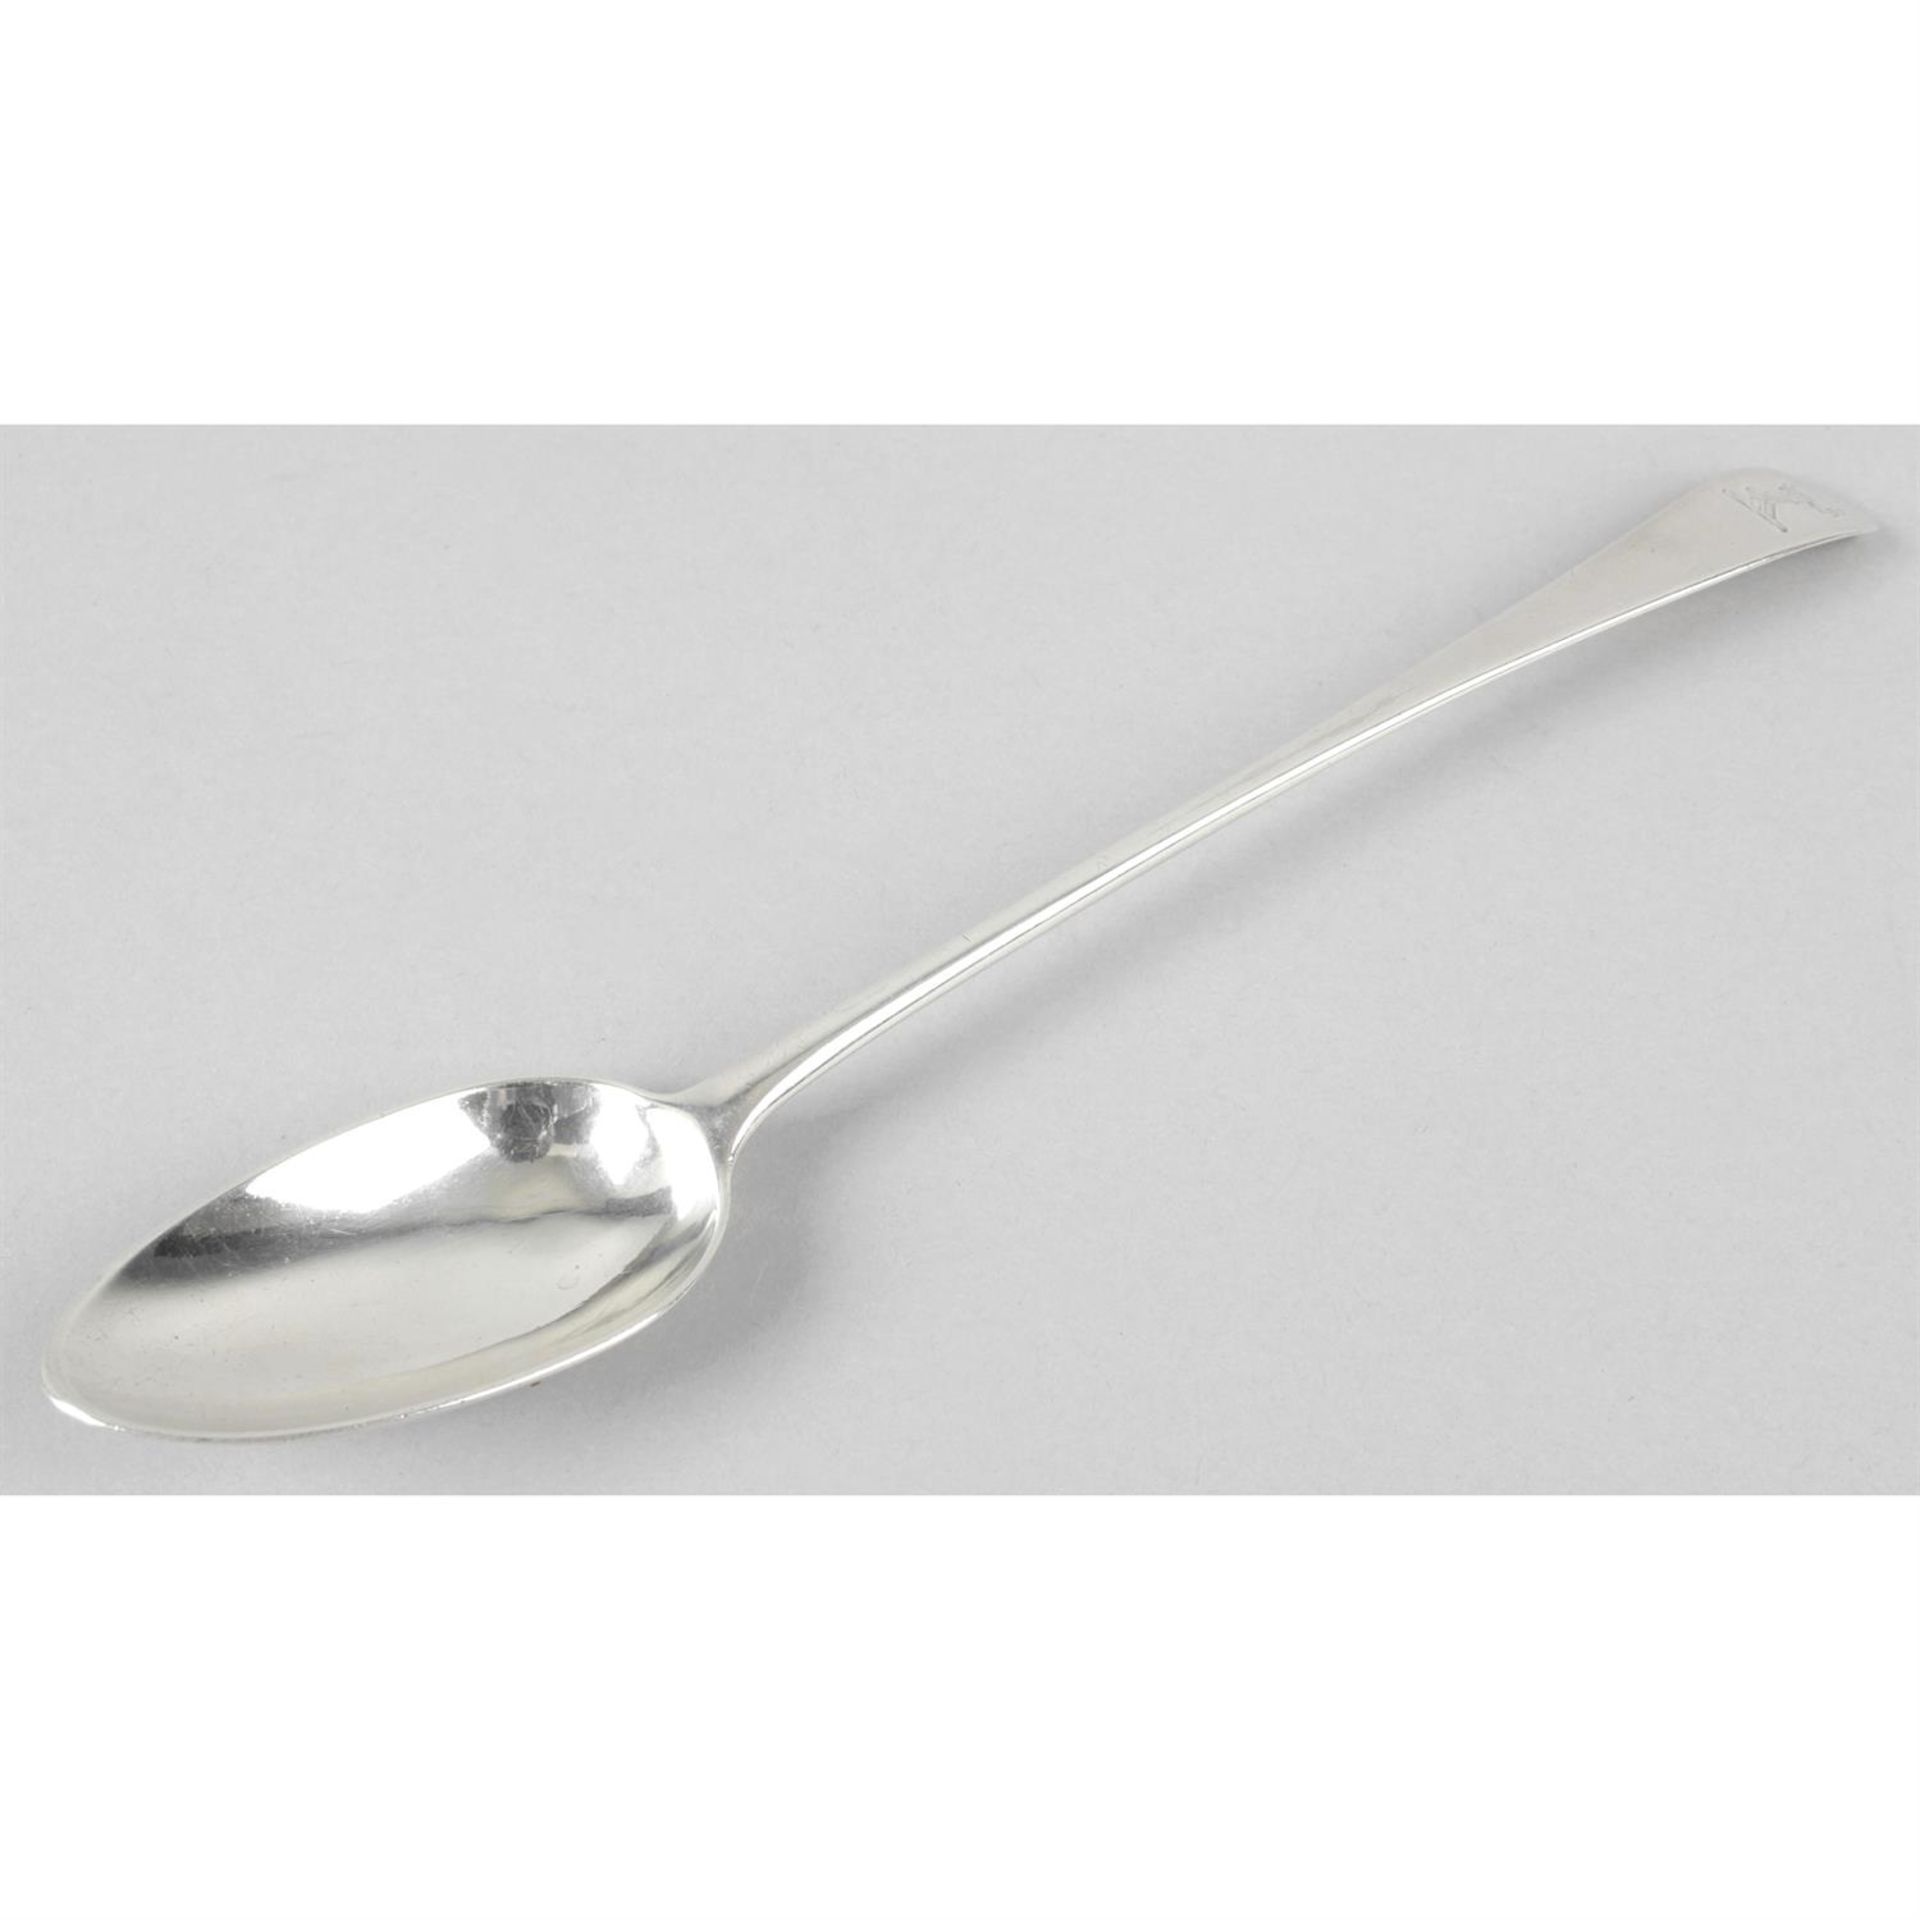 A George III silver serving or basting spoon.